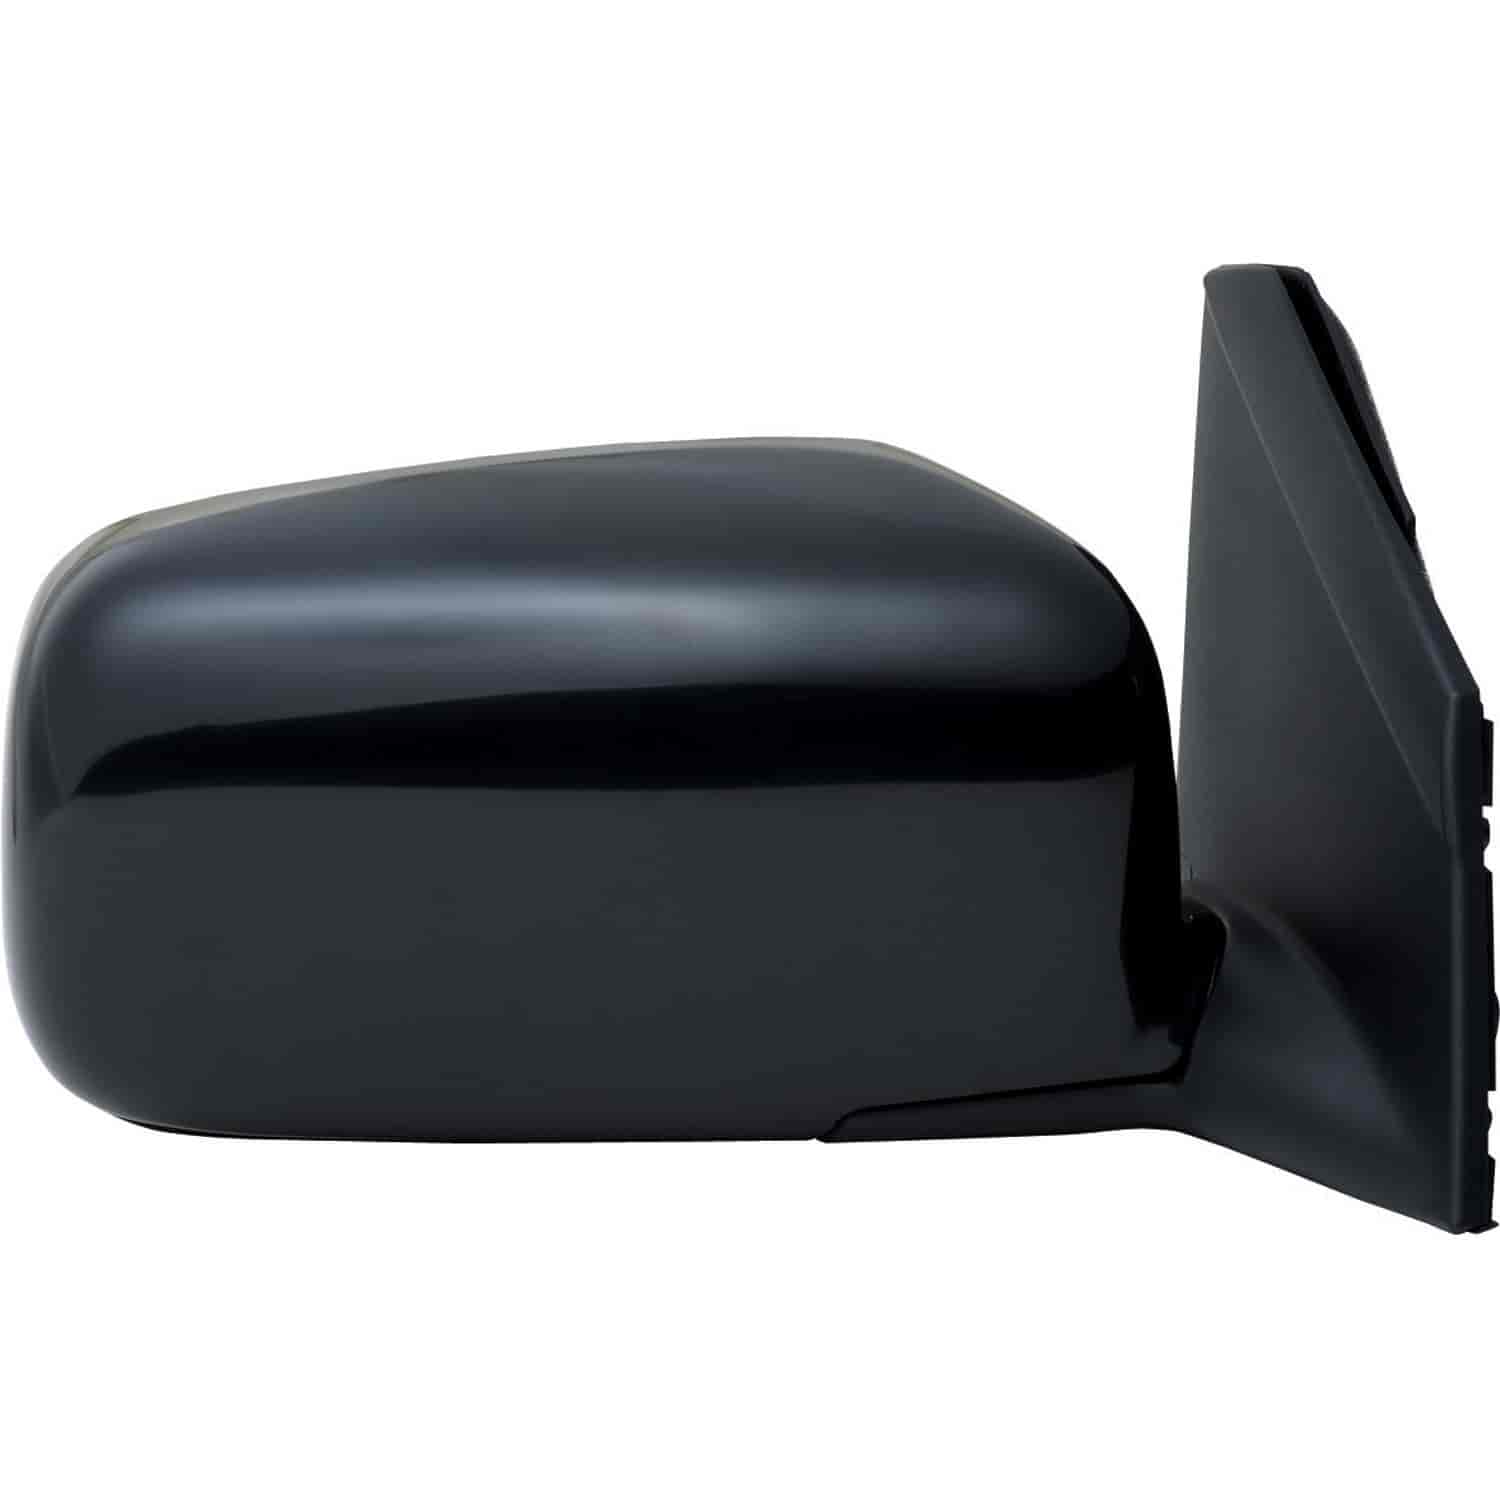 OEM Style Replacement mirror for 04-14 Nissan Titan S 04-10 XE Model passenger side mirror tested to